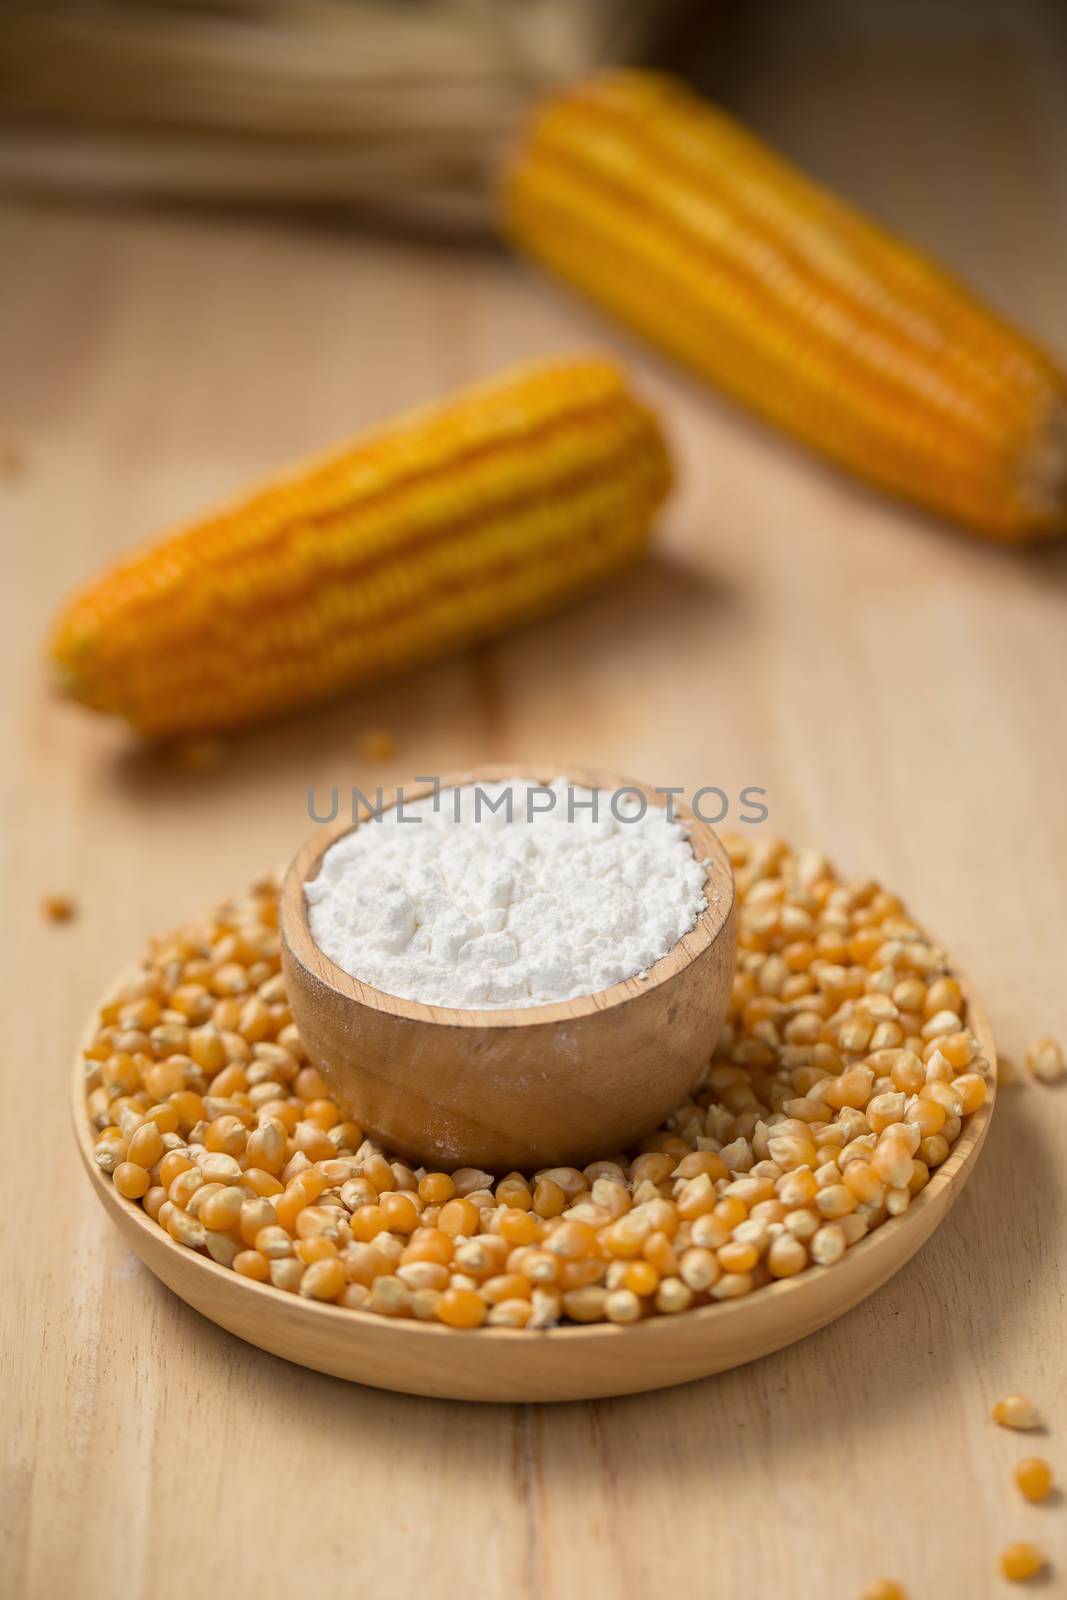 Corn flour in a bowl over a wooden table by kaiskynet